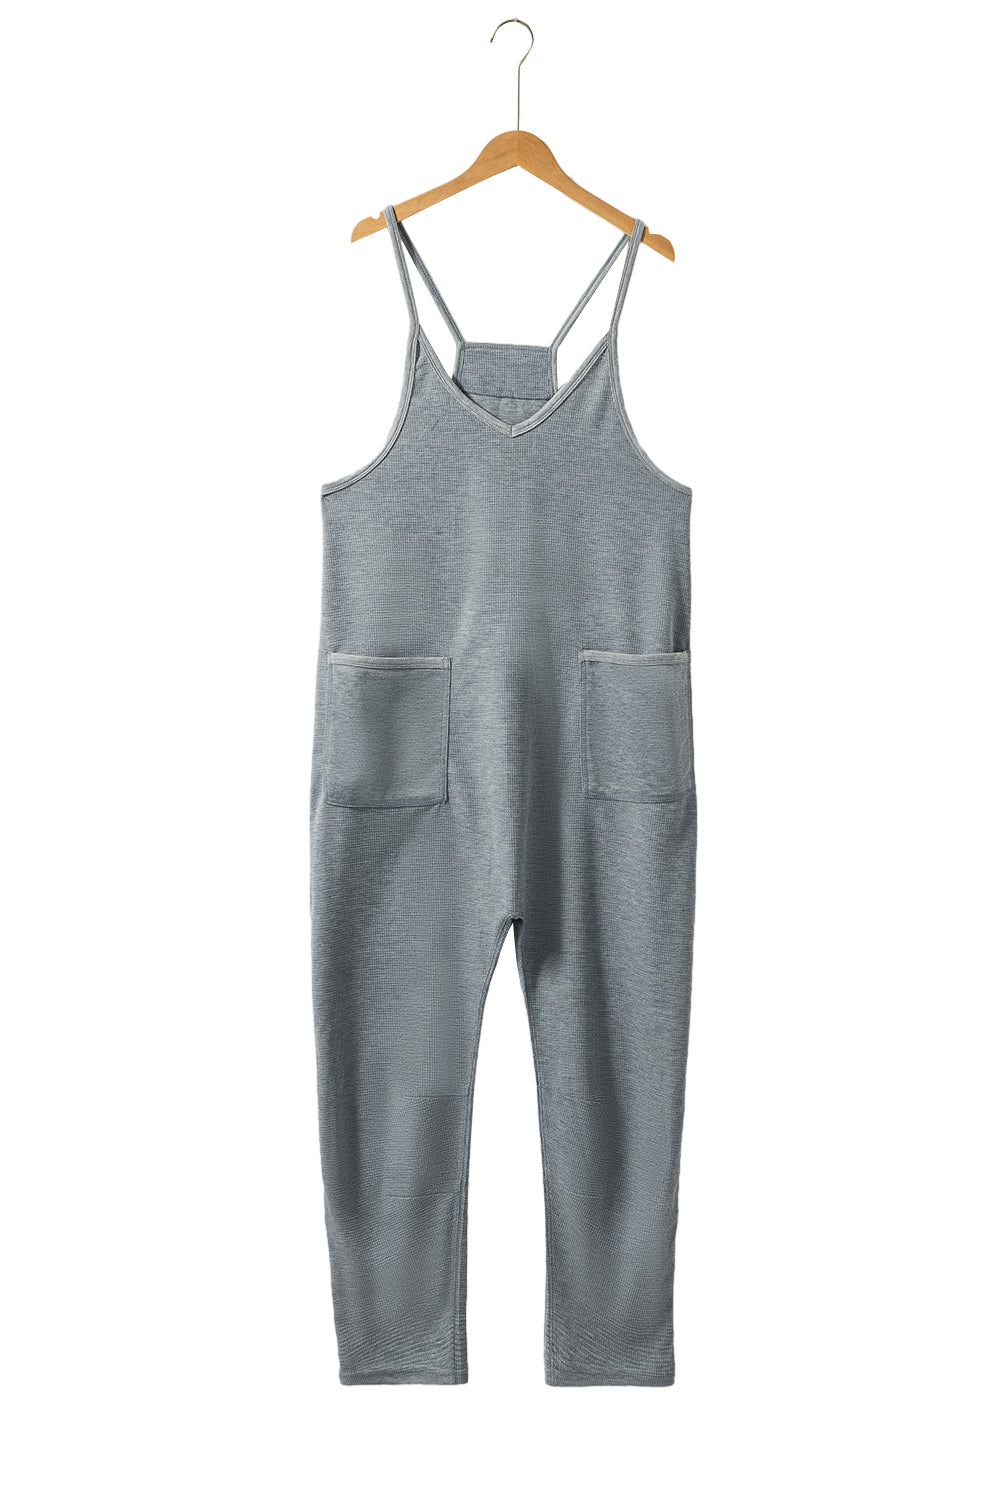 Gray Waffle Knit Spaghetti Straps Loose Fit Jumpsuit Jumpsuits & Rompers JT's Designer Fashion